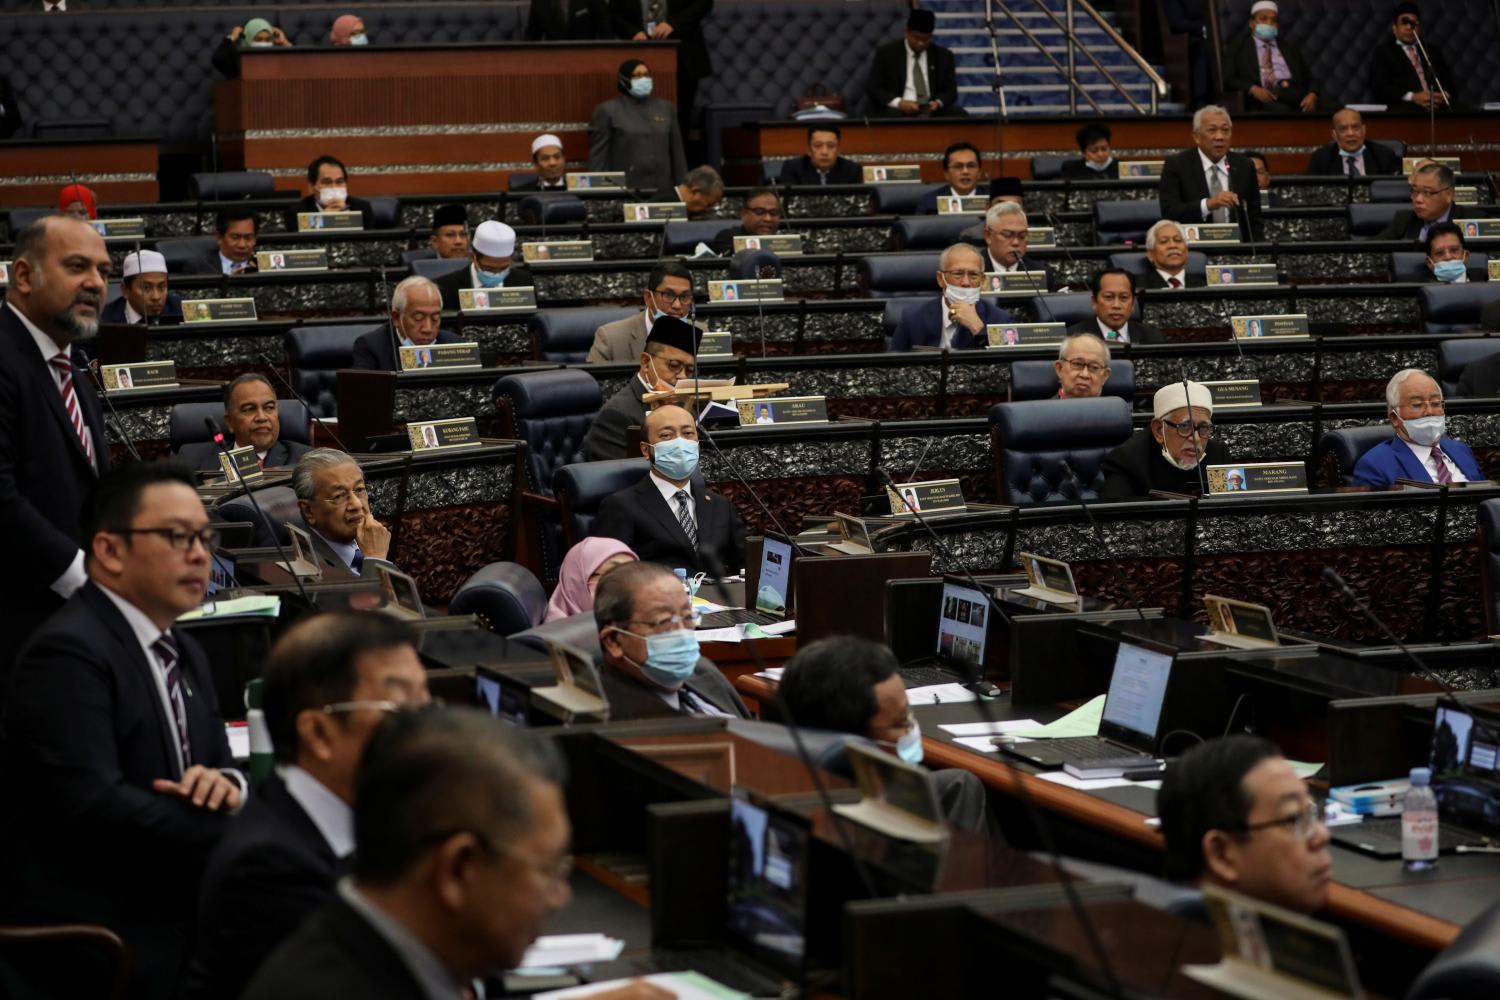 Malaysia's members of parliament attend a session of the lower house of parliament, in Kuala Lumpur, Malaysia on July 13, 2020. 
